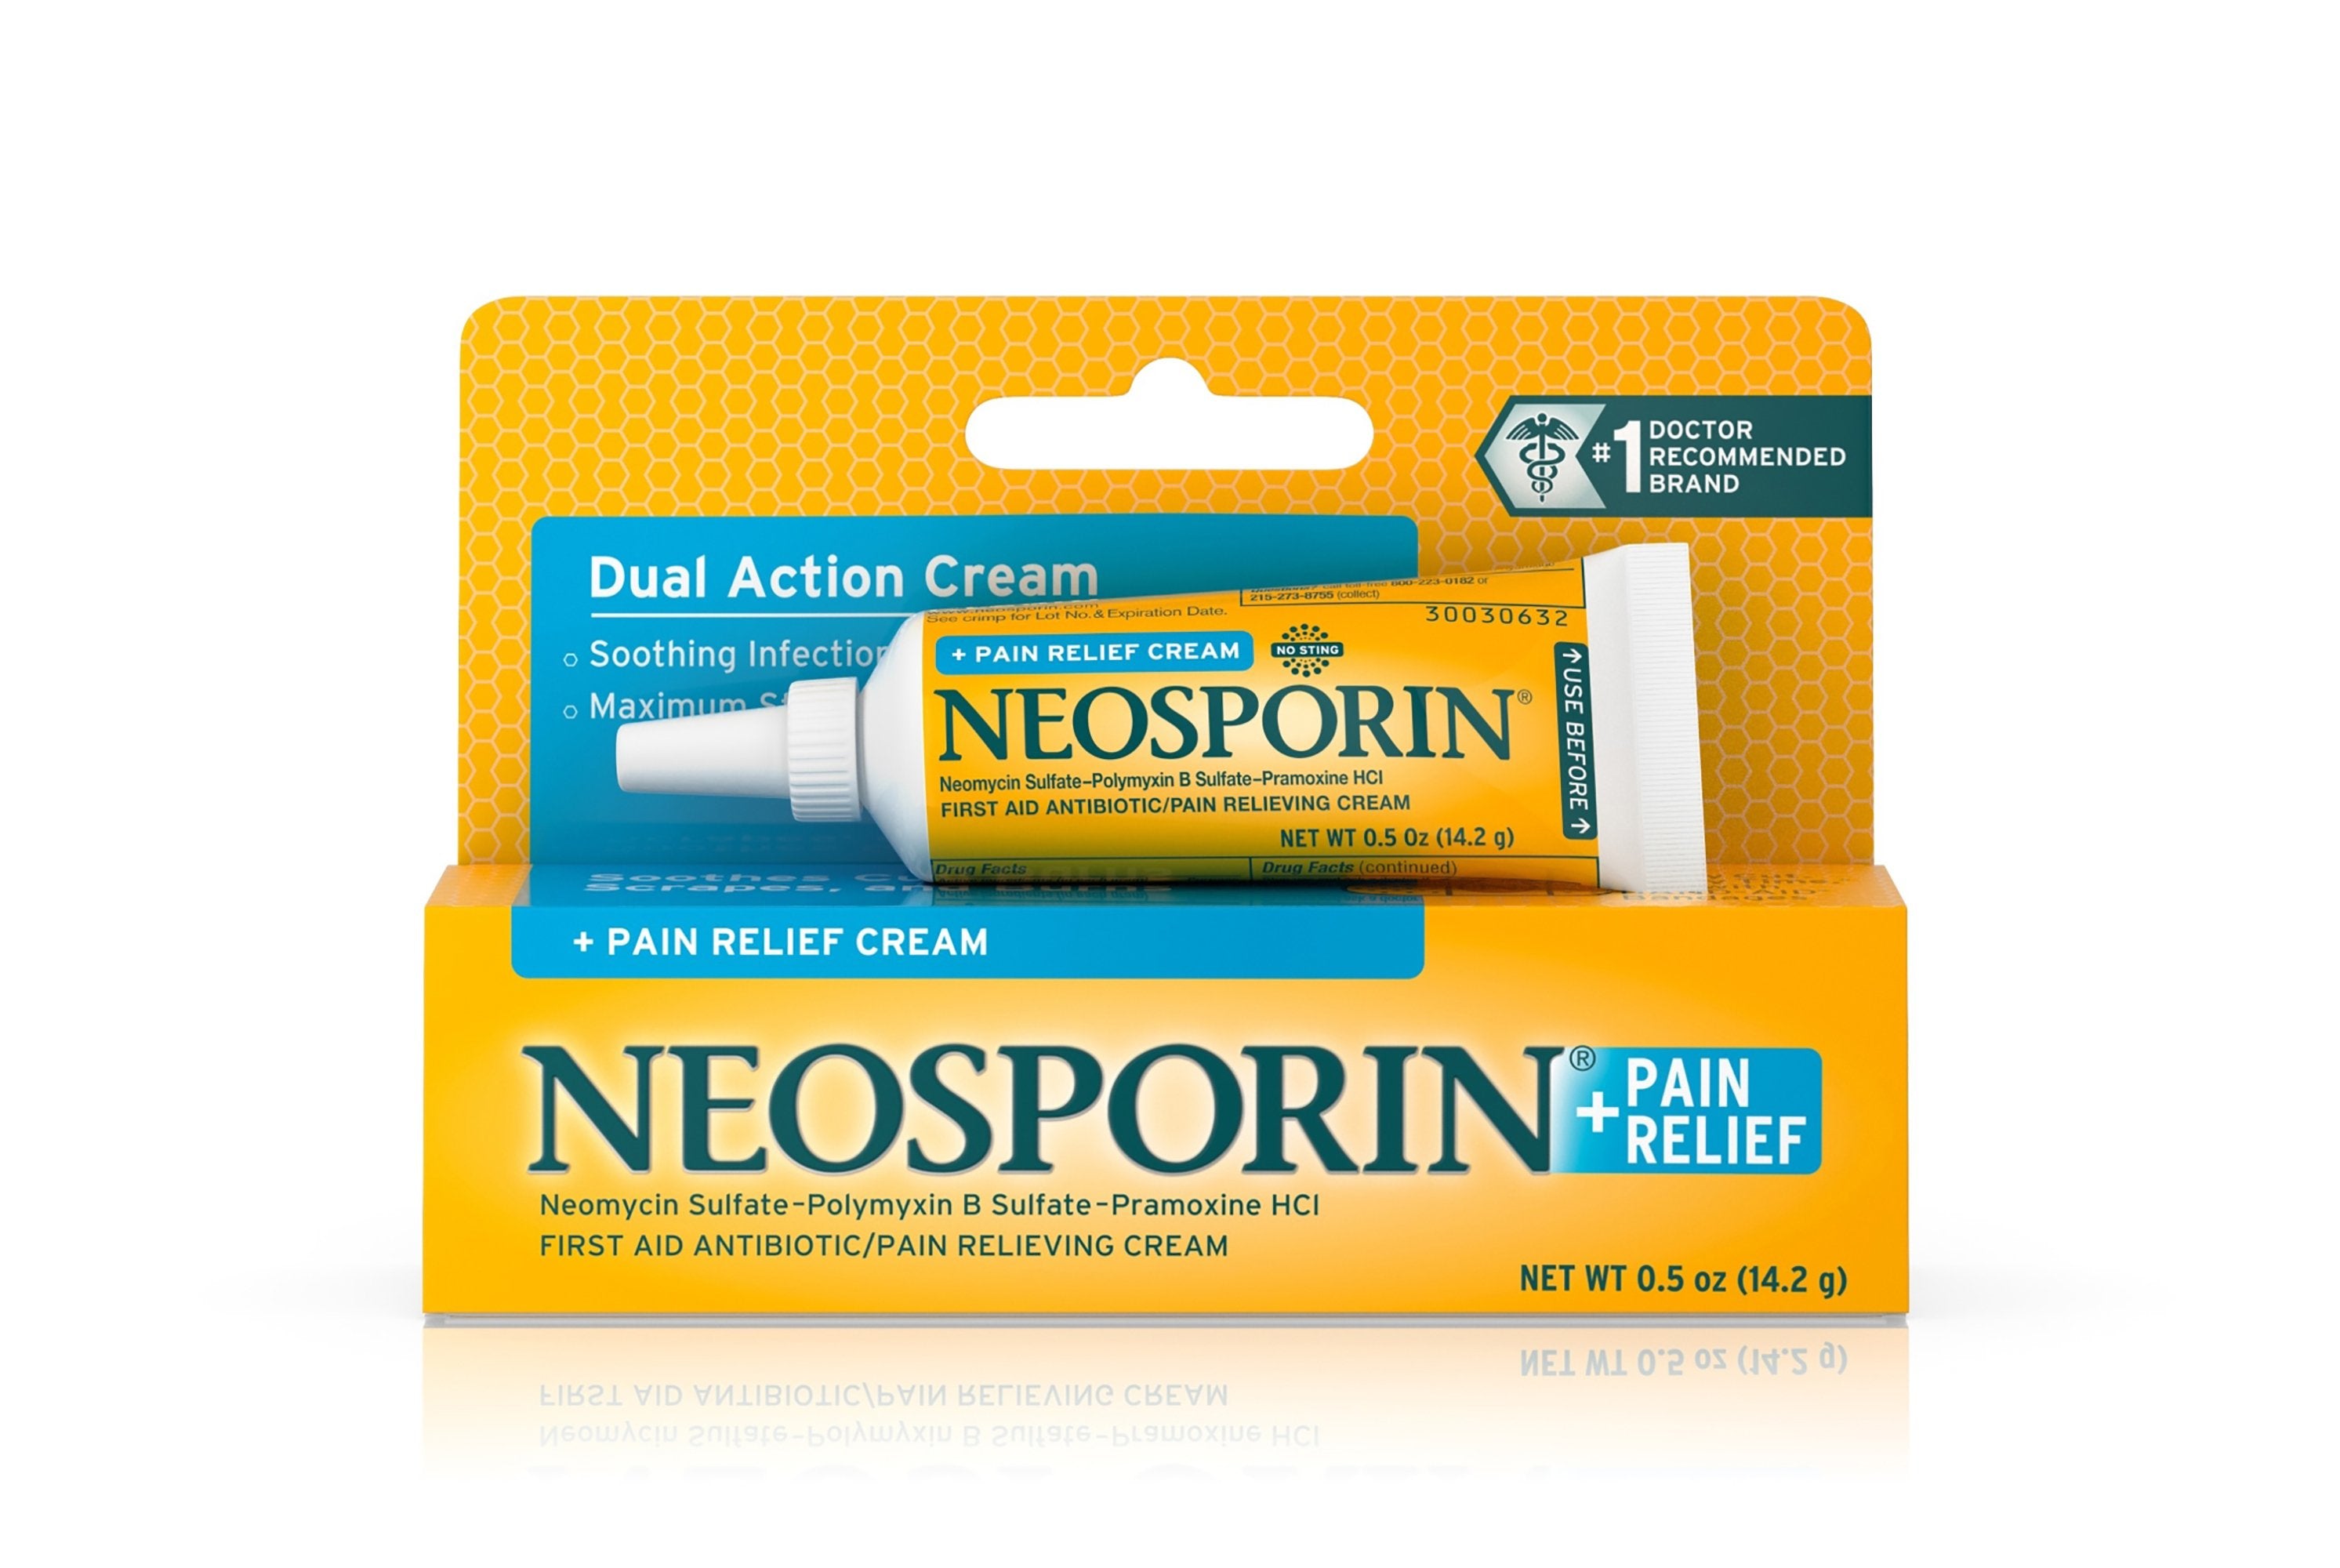 First Aid Antibiotic with Pain Relief Neosporin + Pain Relief Cream 0.5 oz. Tube